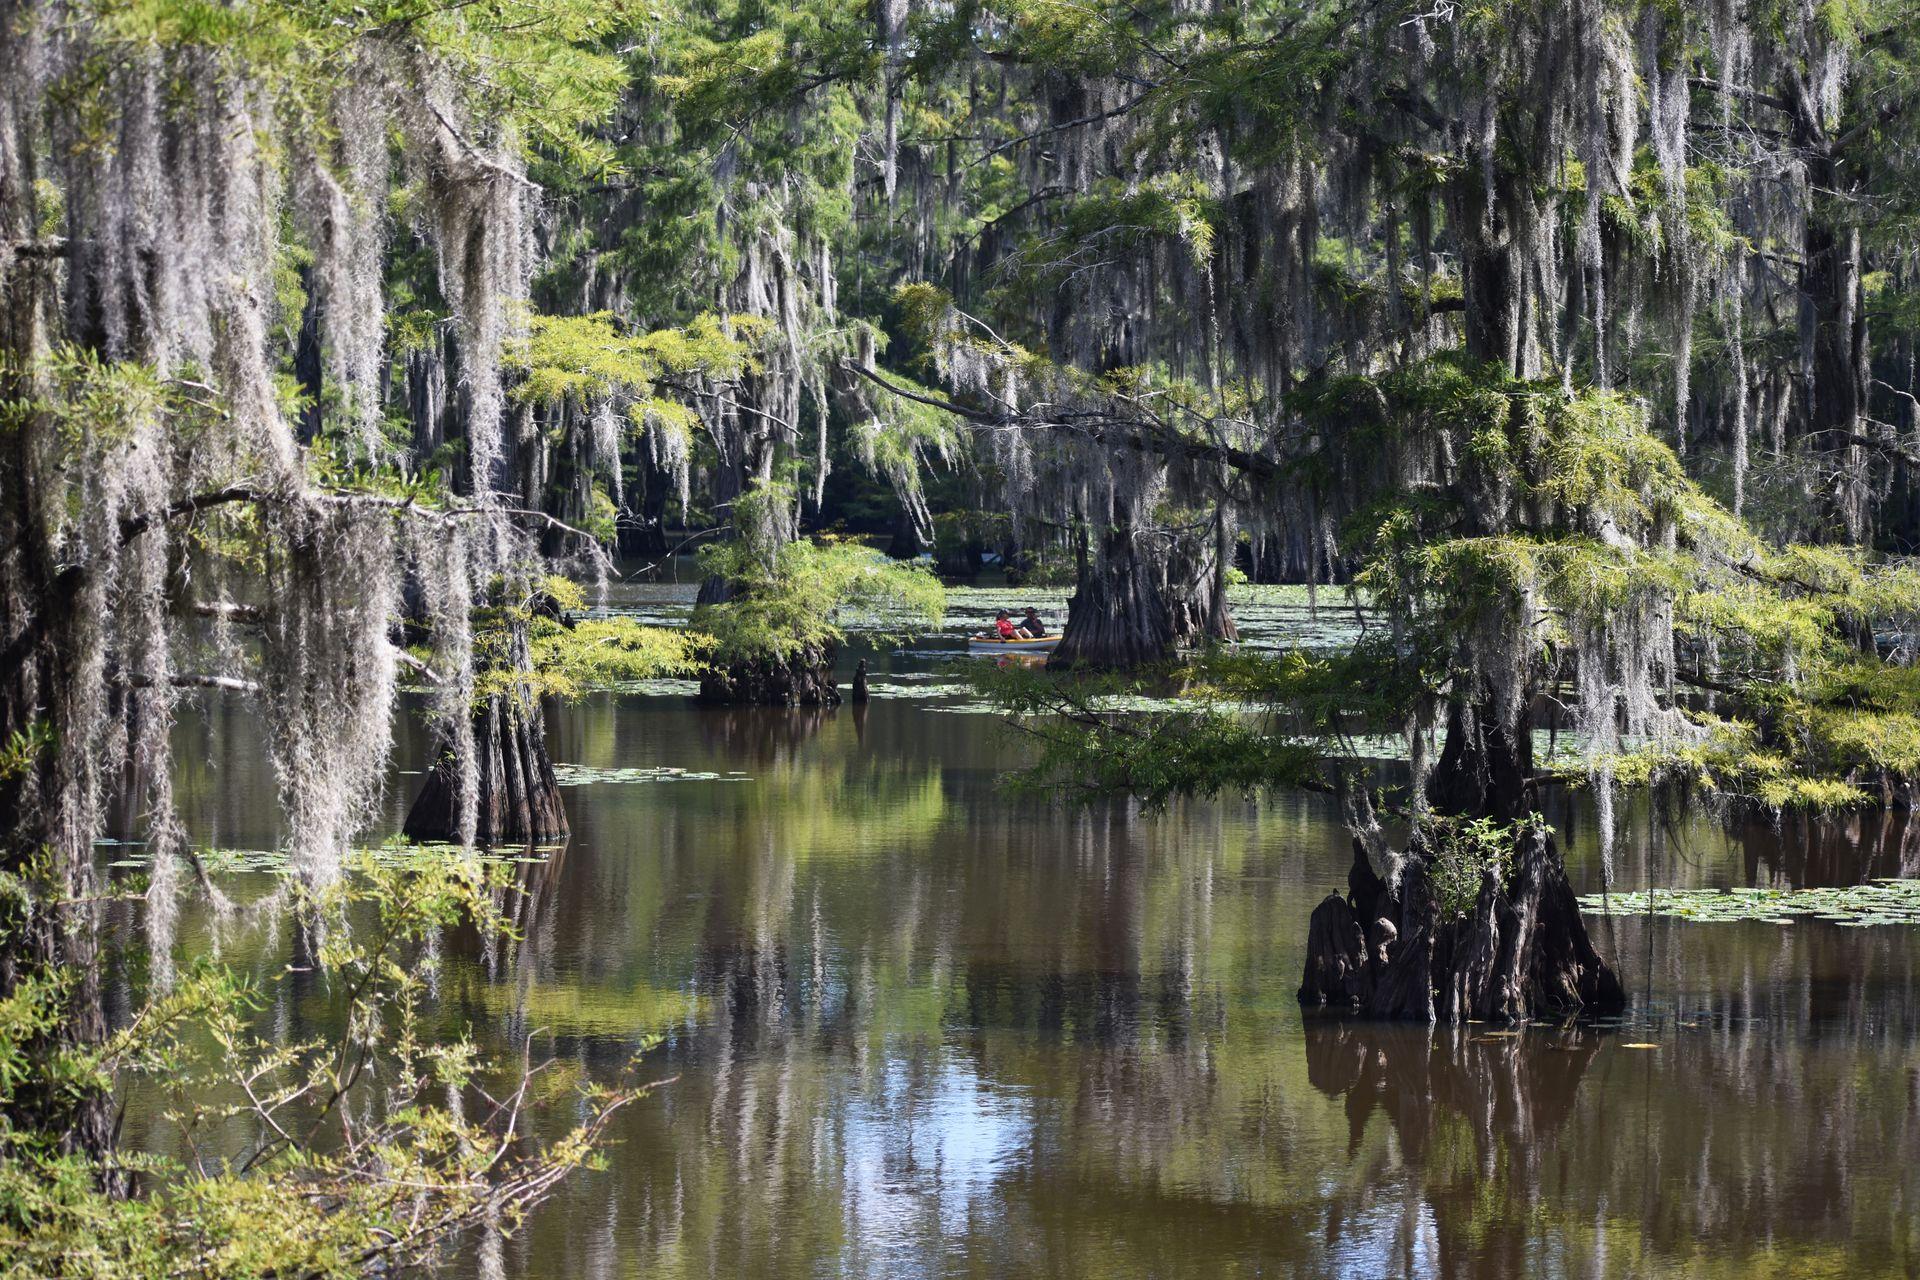 A view of Mill Pond at Caddo Lake State Park. There are a couple people on canoes and cypress trees hanging with moss.